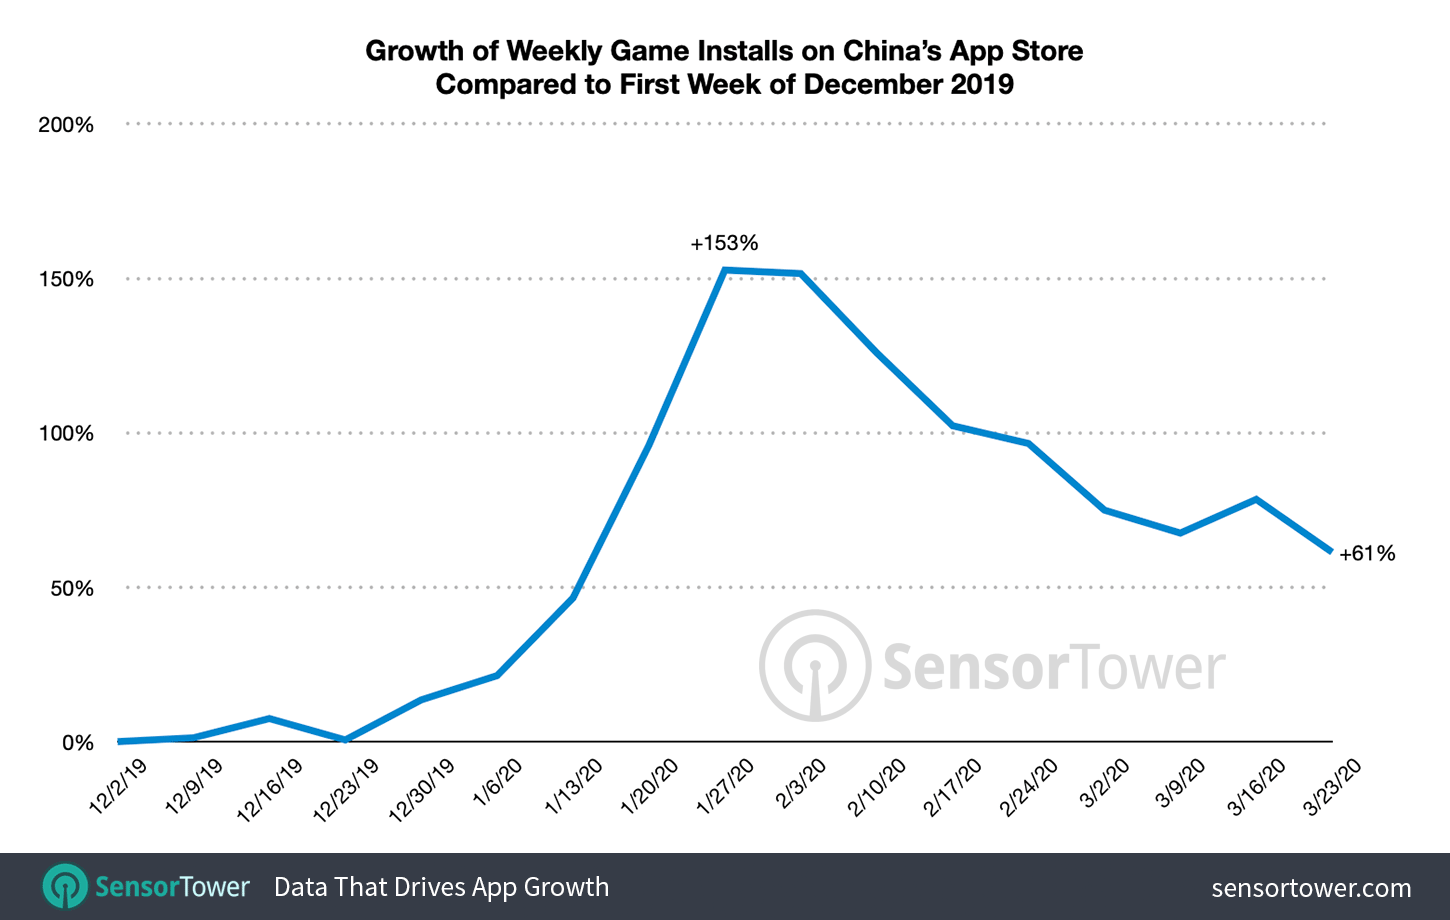 China App Store Spending on Mobile Games for 2020